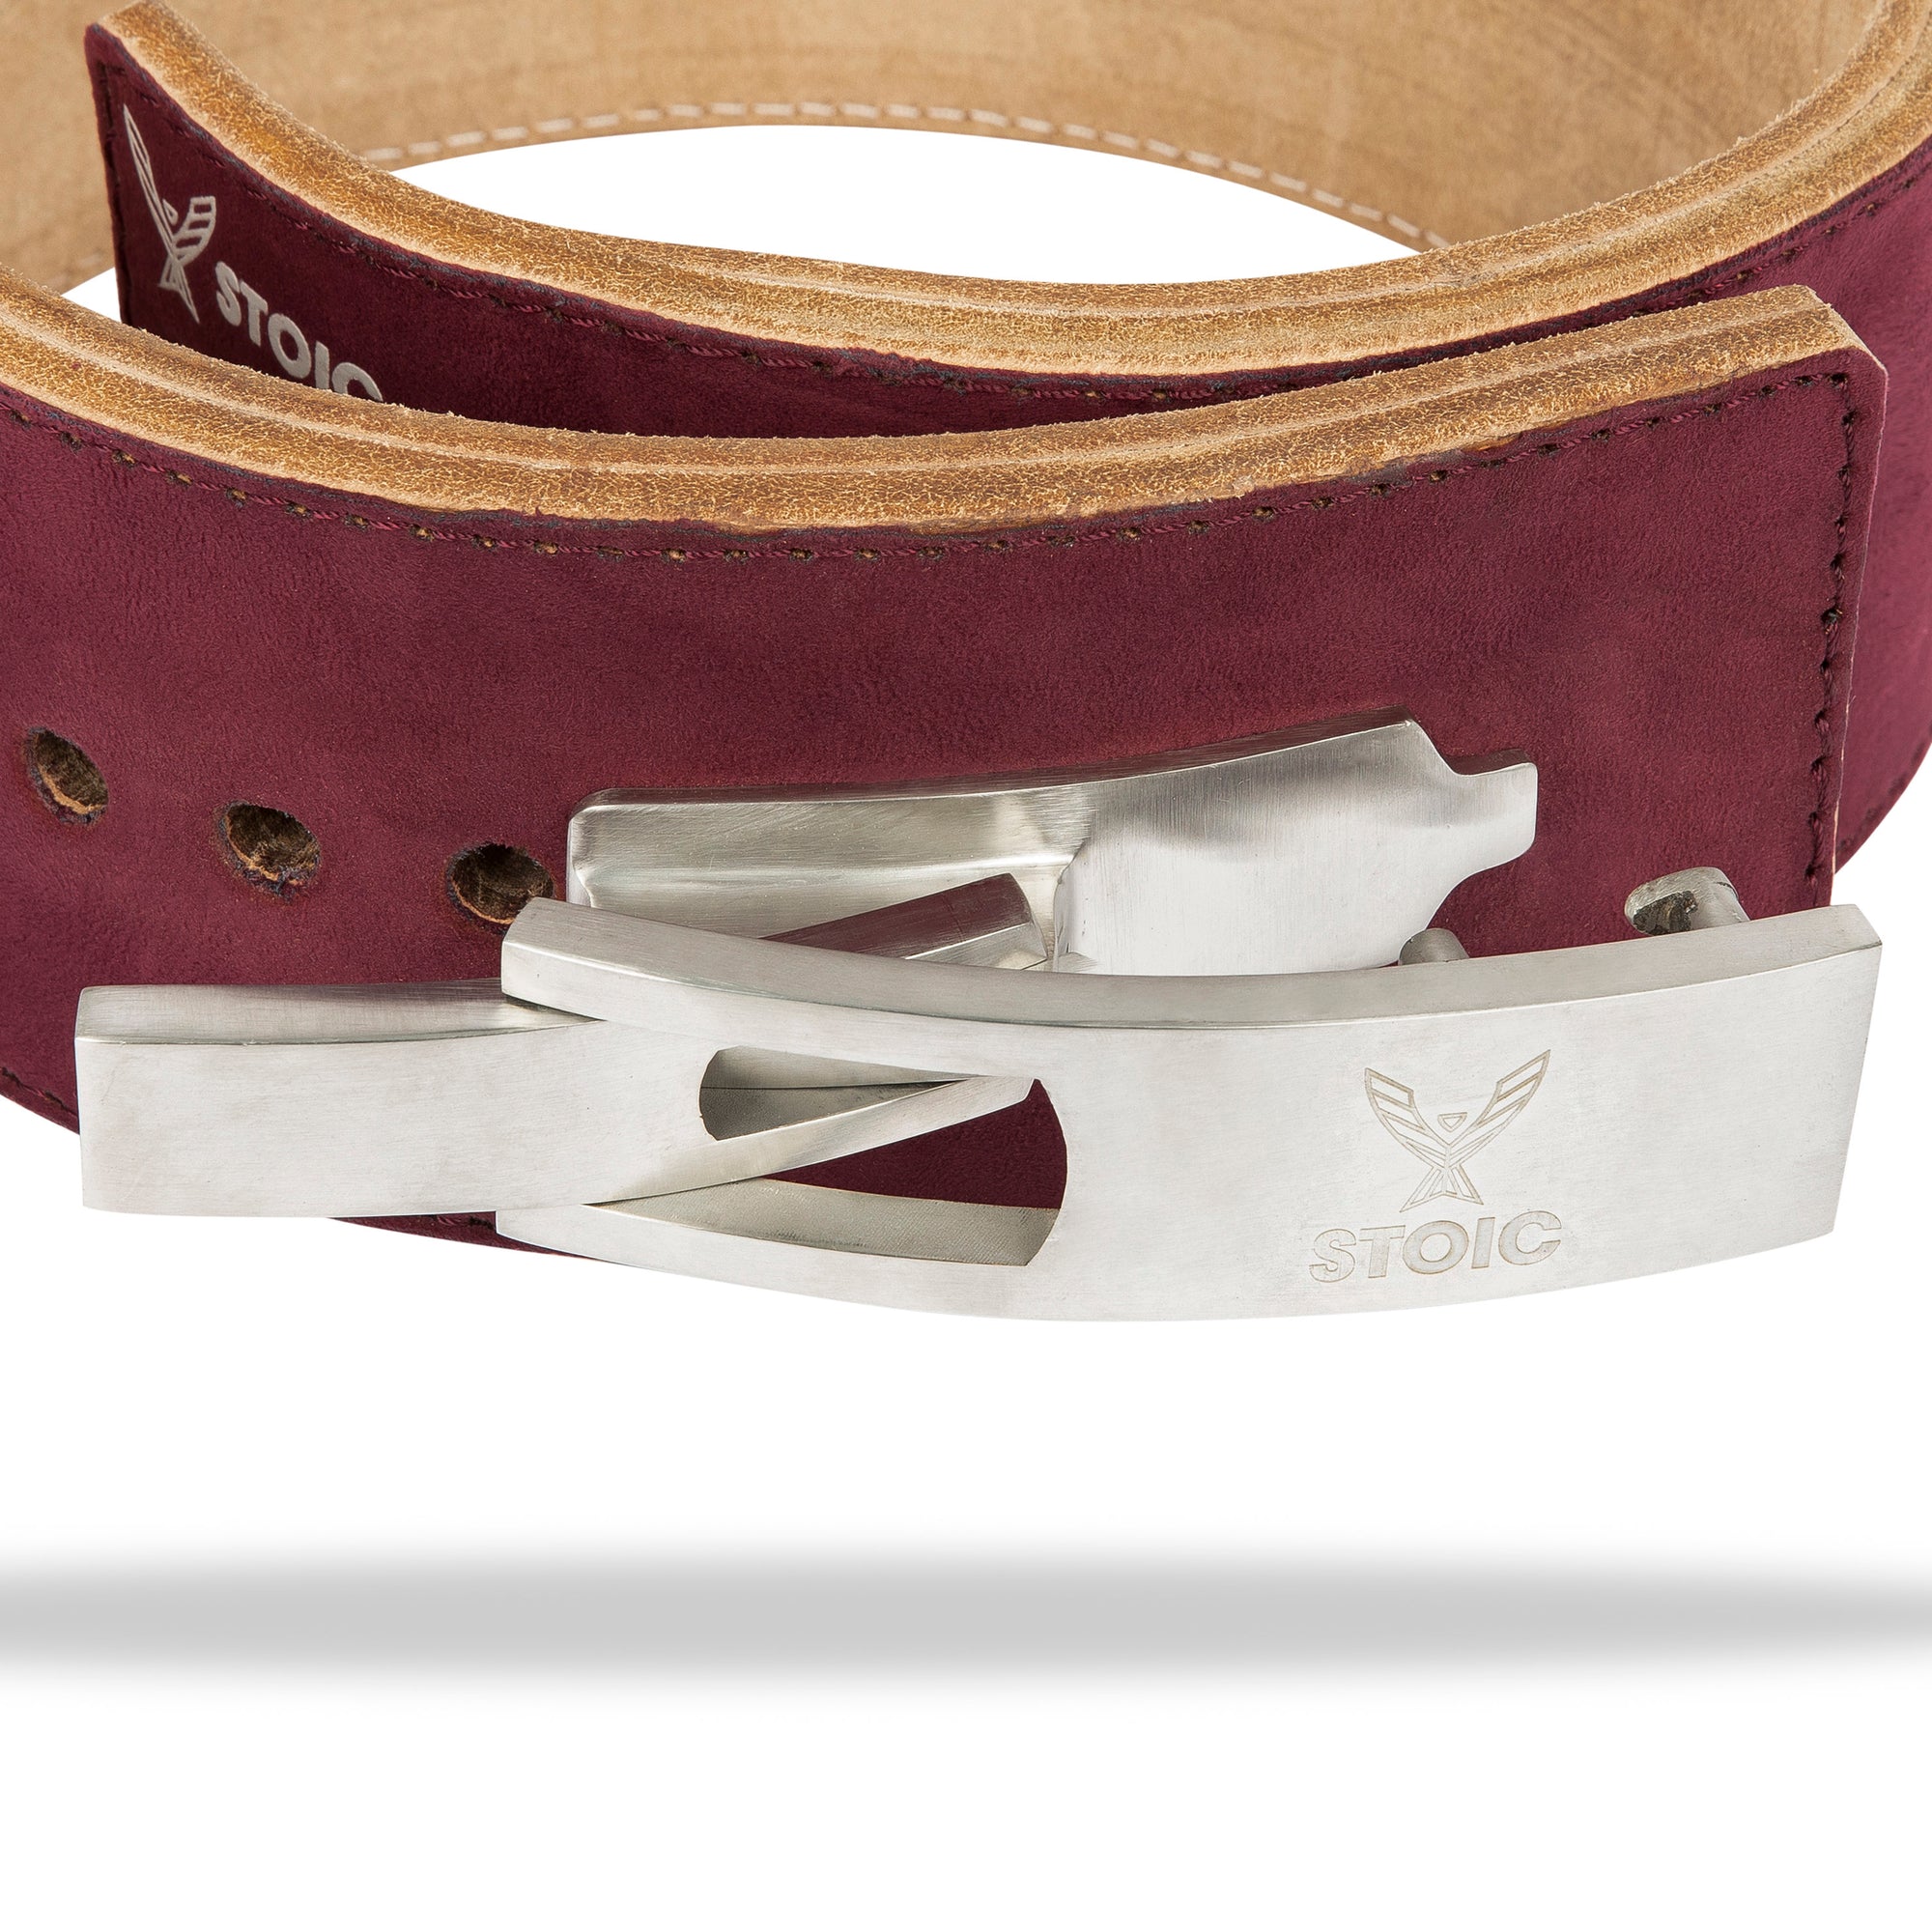 Stoic Lever Powerlifting Belt (13mm) - Maroon